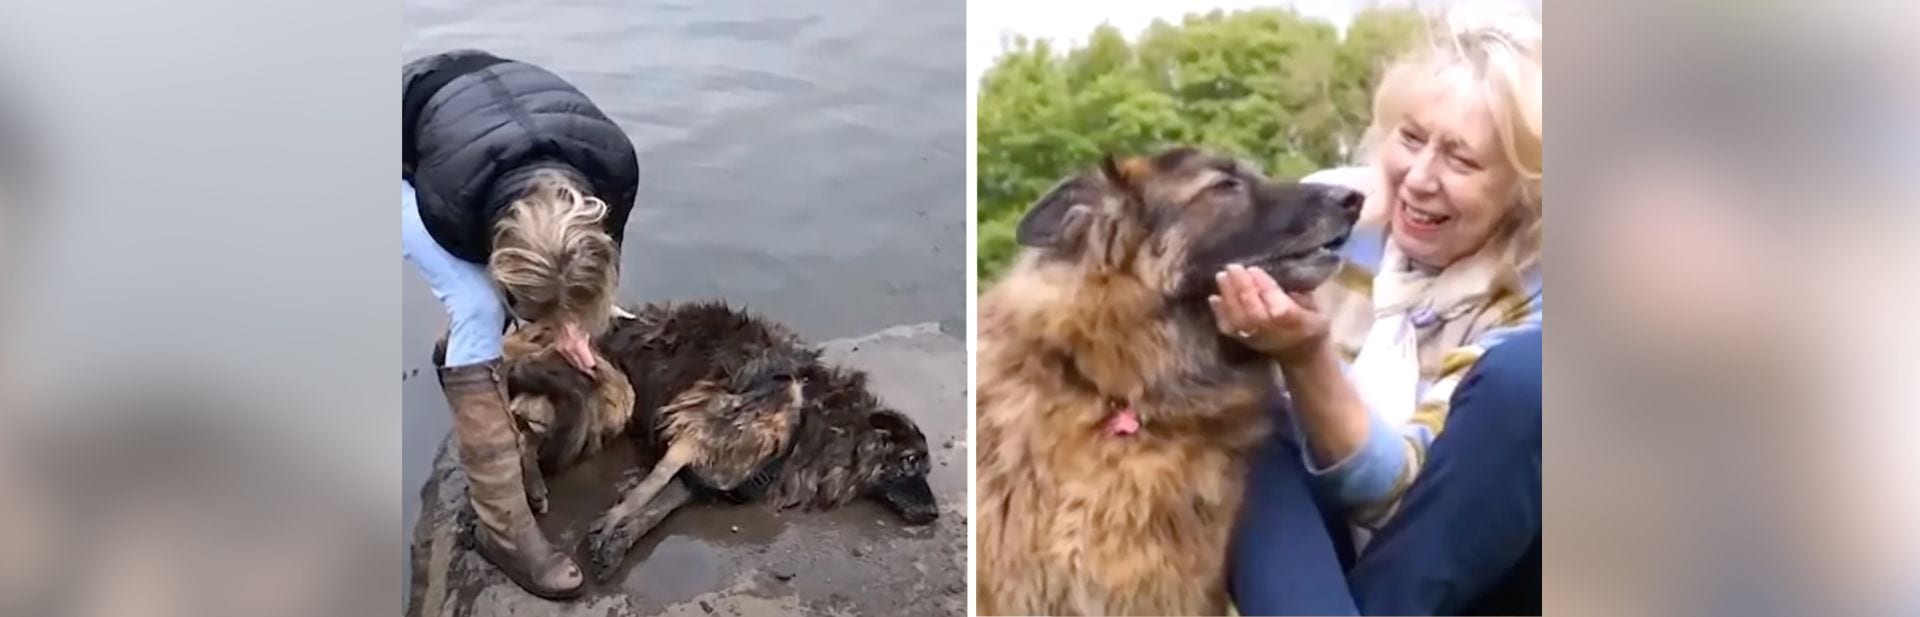 11-Year-Old German Shepherd Saved From Drowning Gets a Second Chance Thanks To Elderly Couple